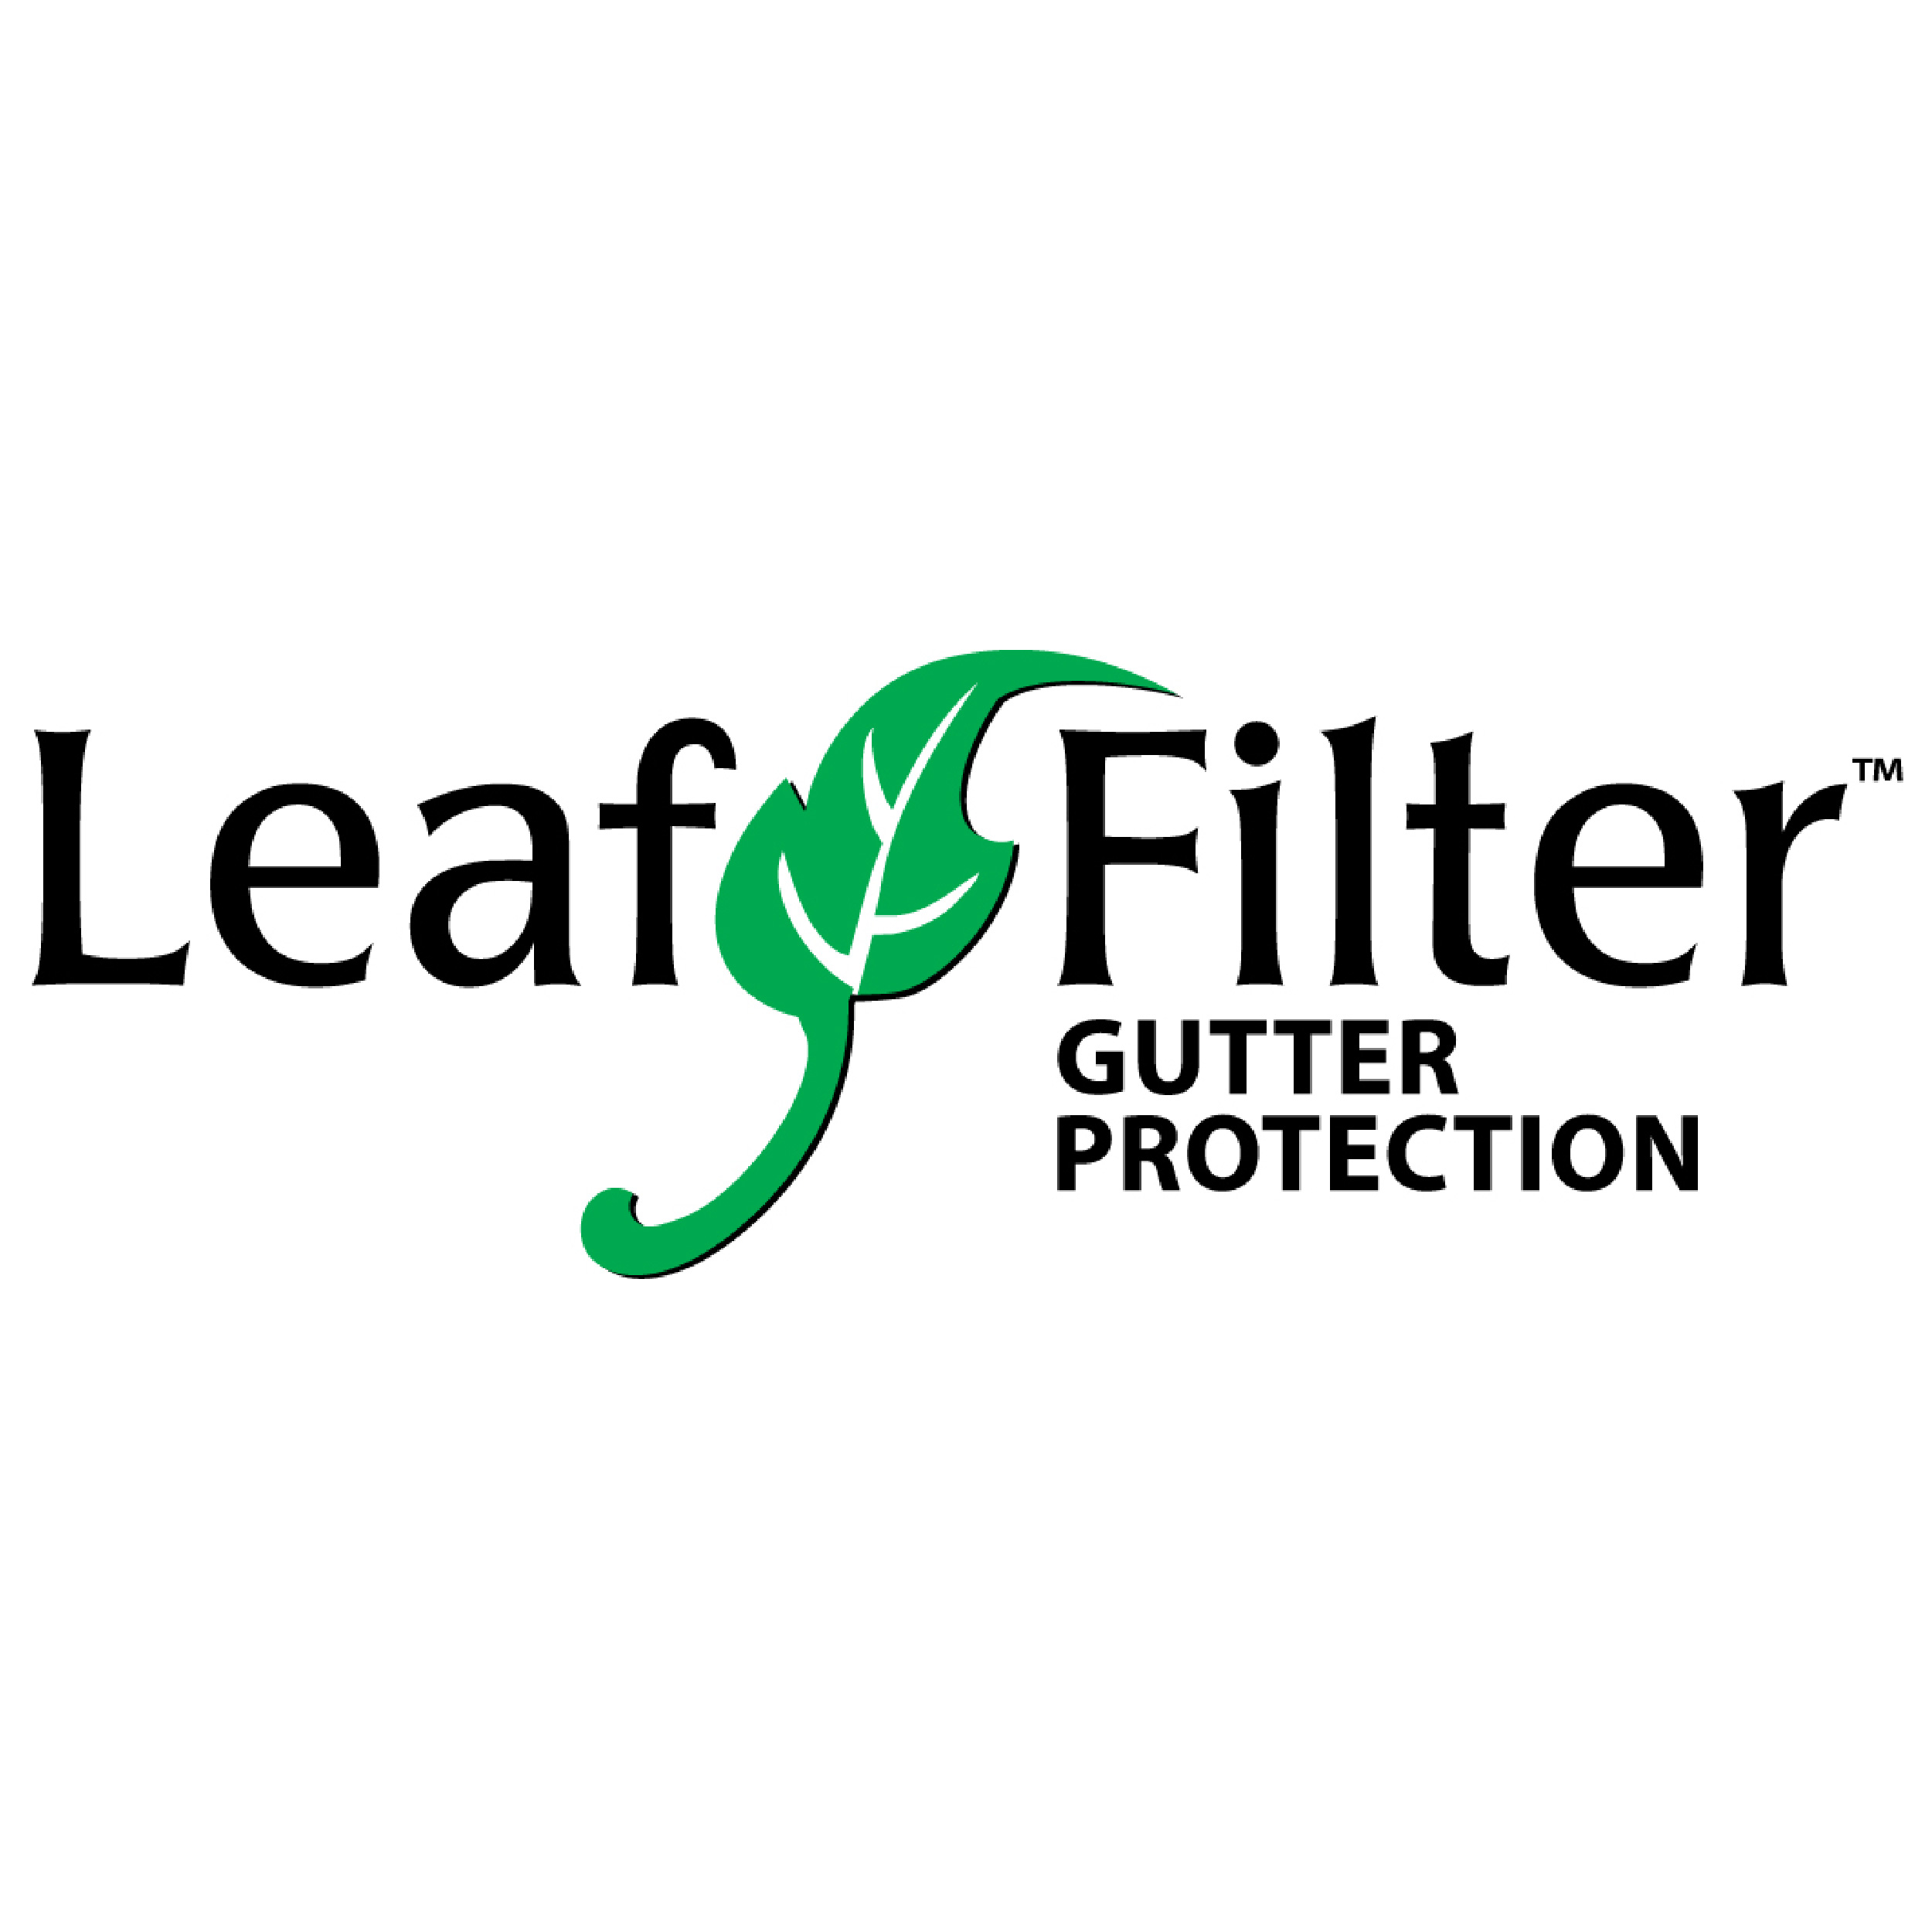 LeafFilter